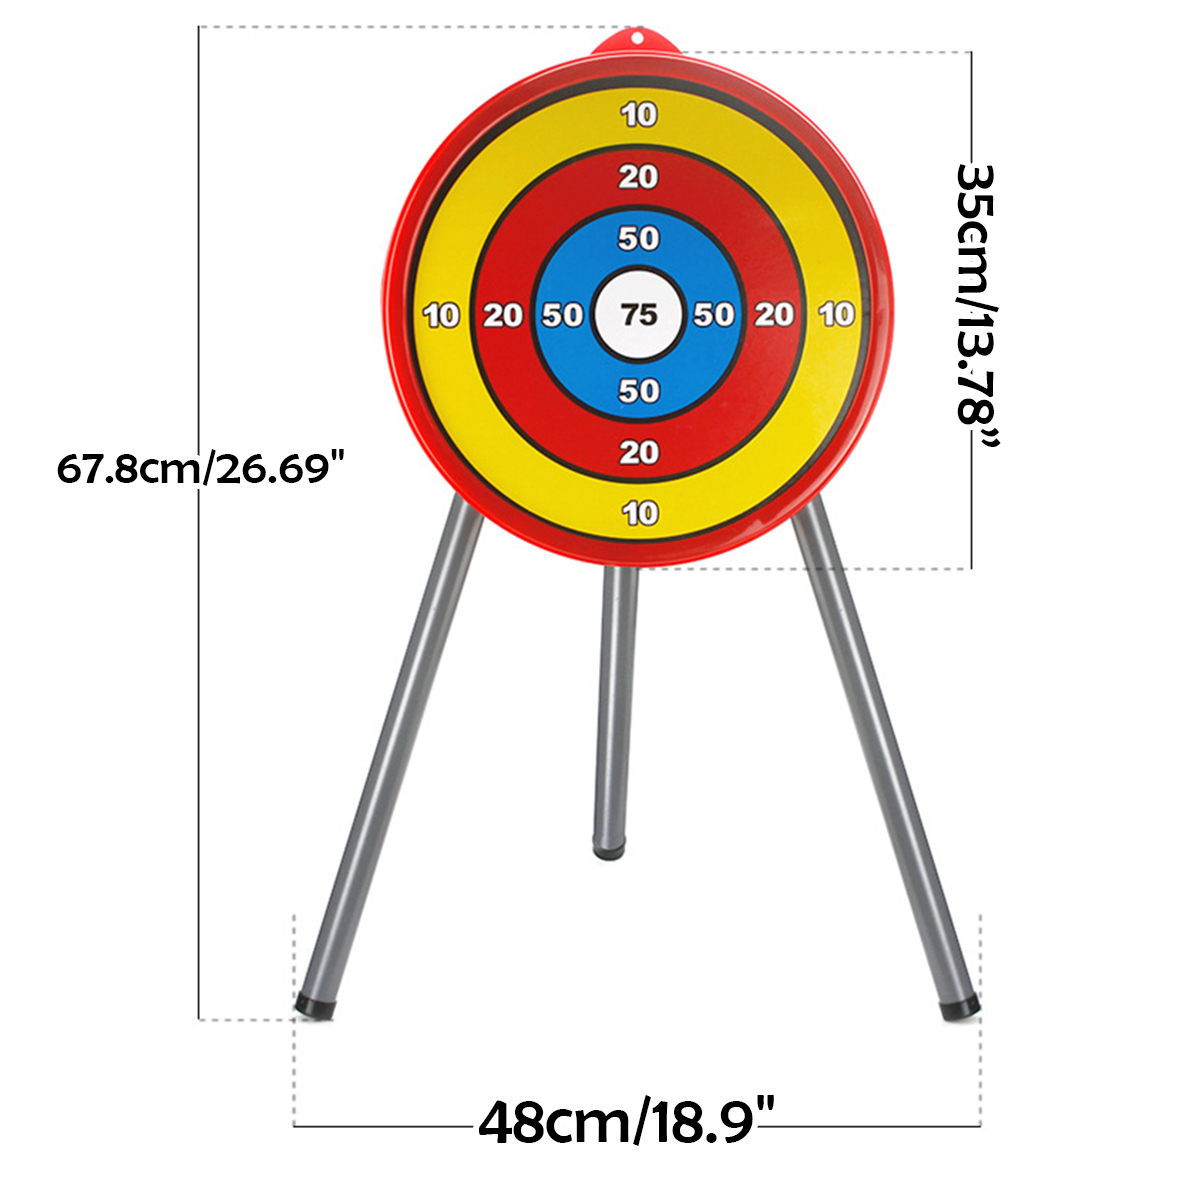 Classic-Archery-Shoot-Game-Set-Develop-Skill-Novelties-Toys-for-Young-Kids-1690766-11